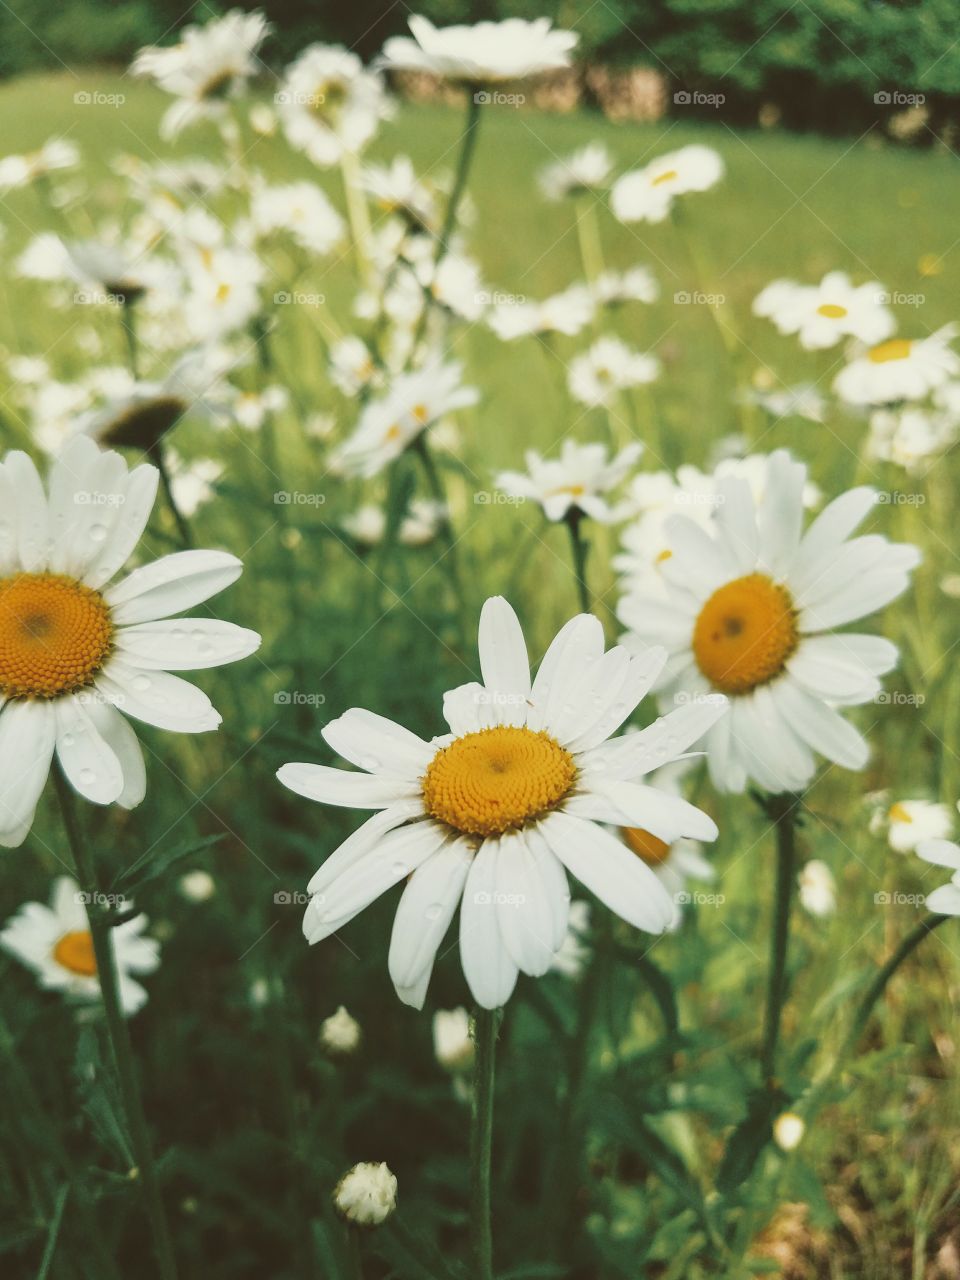 Vintage style picture of white daisy flowers and green grass in a sunny field